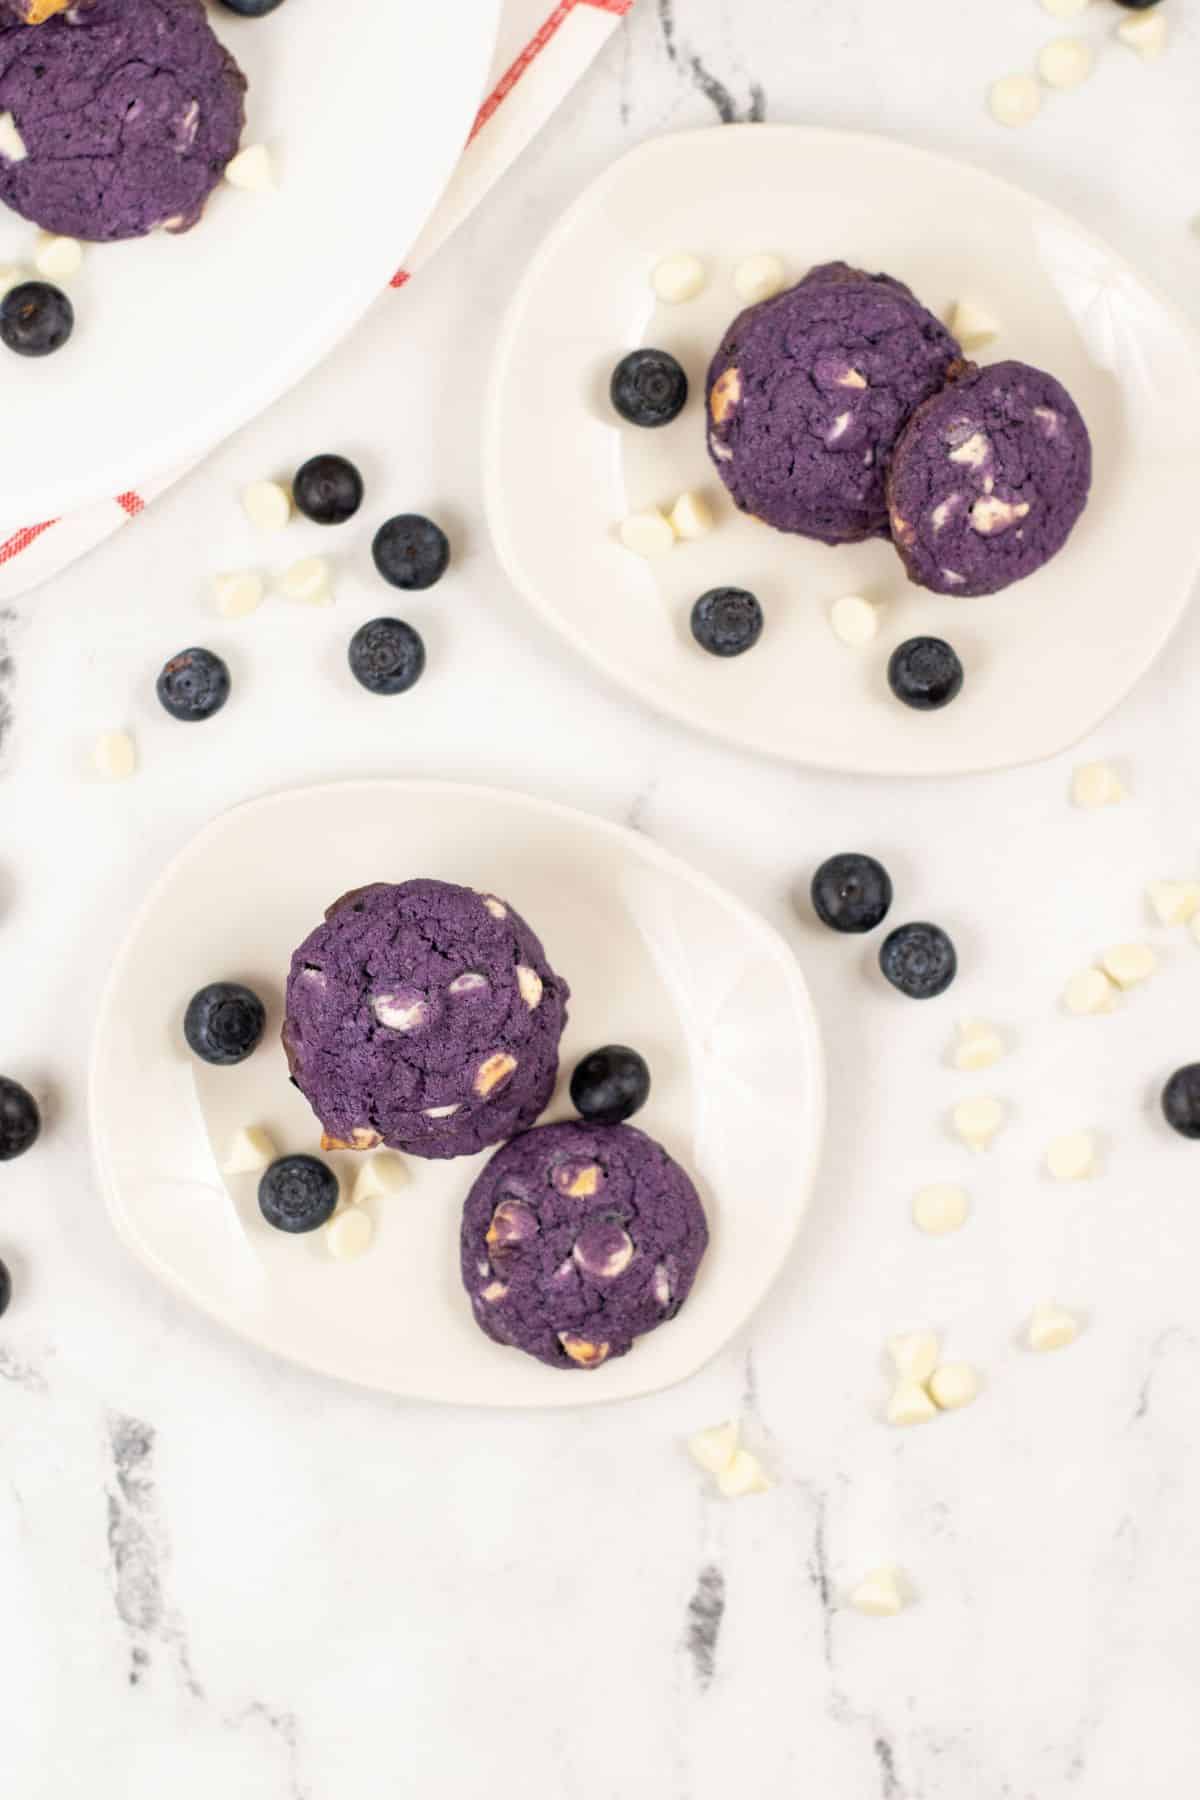 Blueberry White Chocolate Cookies on white plates surrounded by blueberries and white chocolate chips